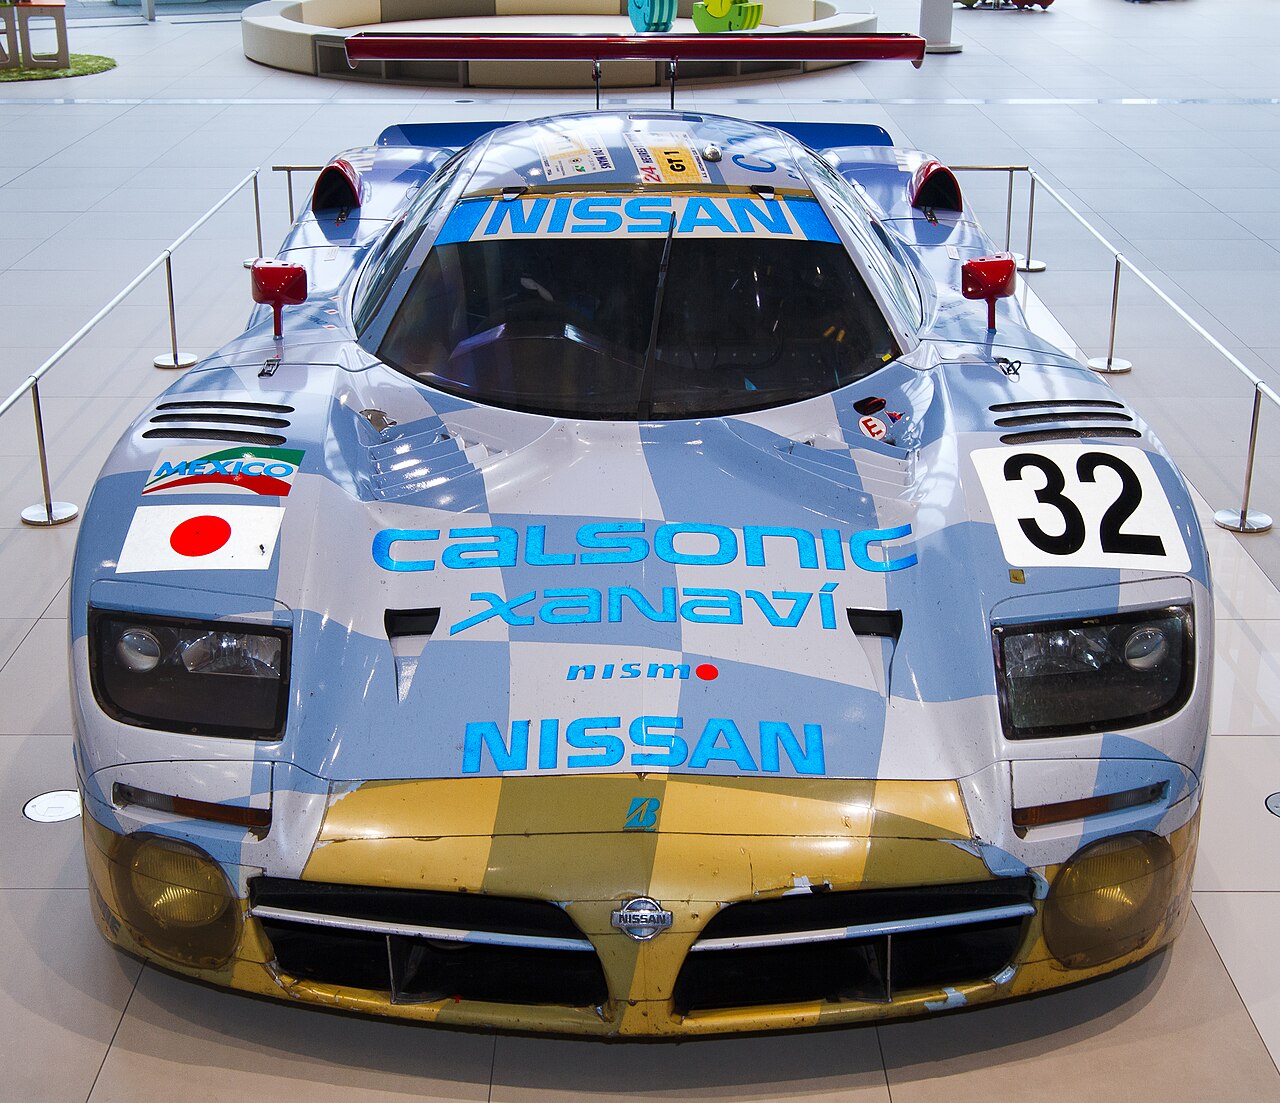 Image of Nissan R390 GT1 (1998) front 2012 Nissan Global Headquarters Gallery